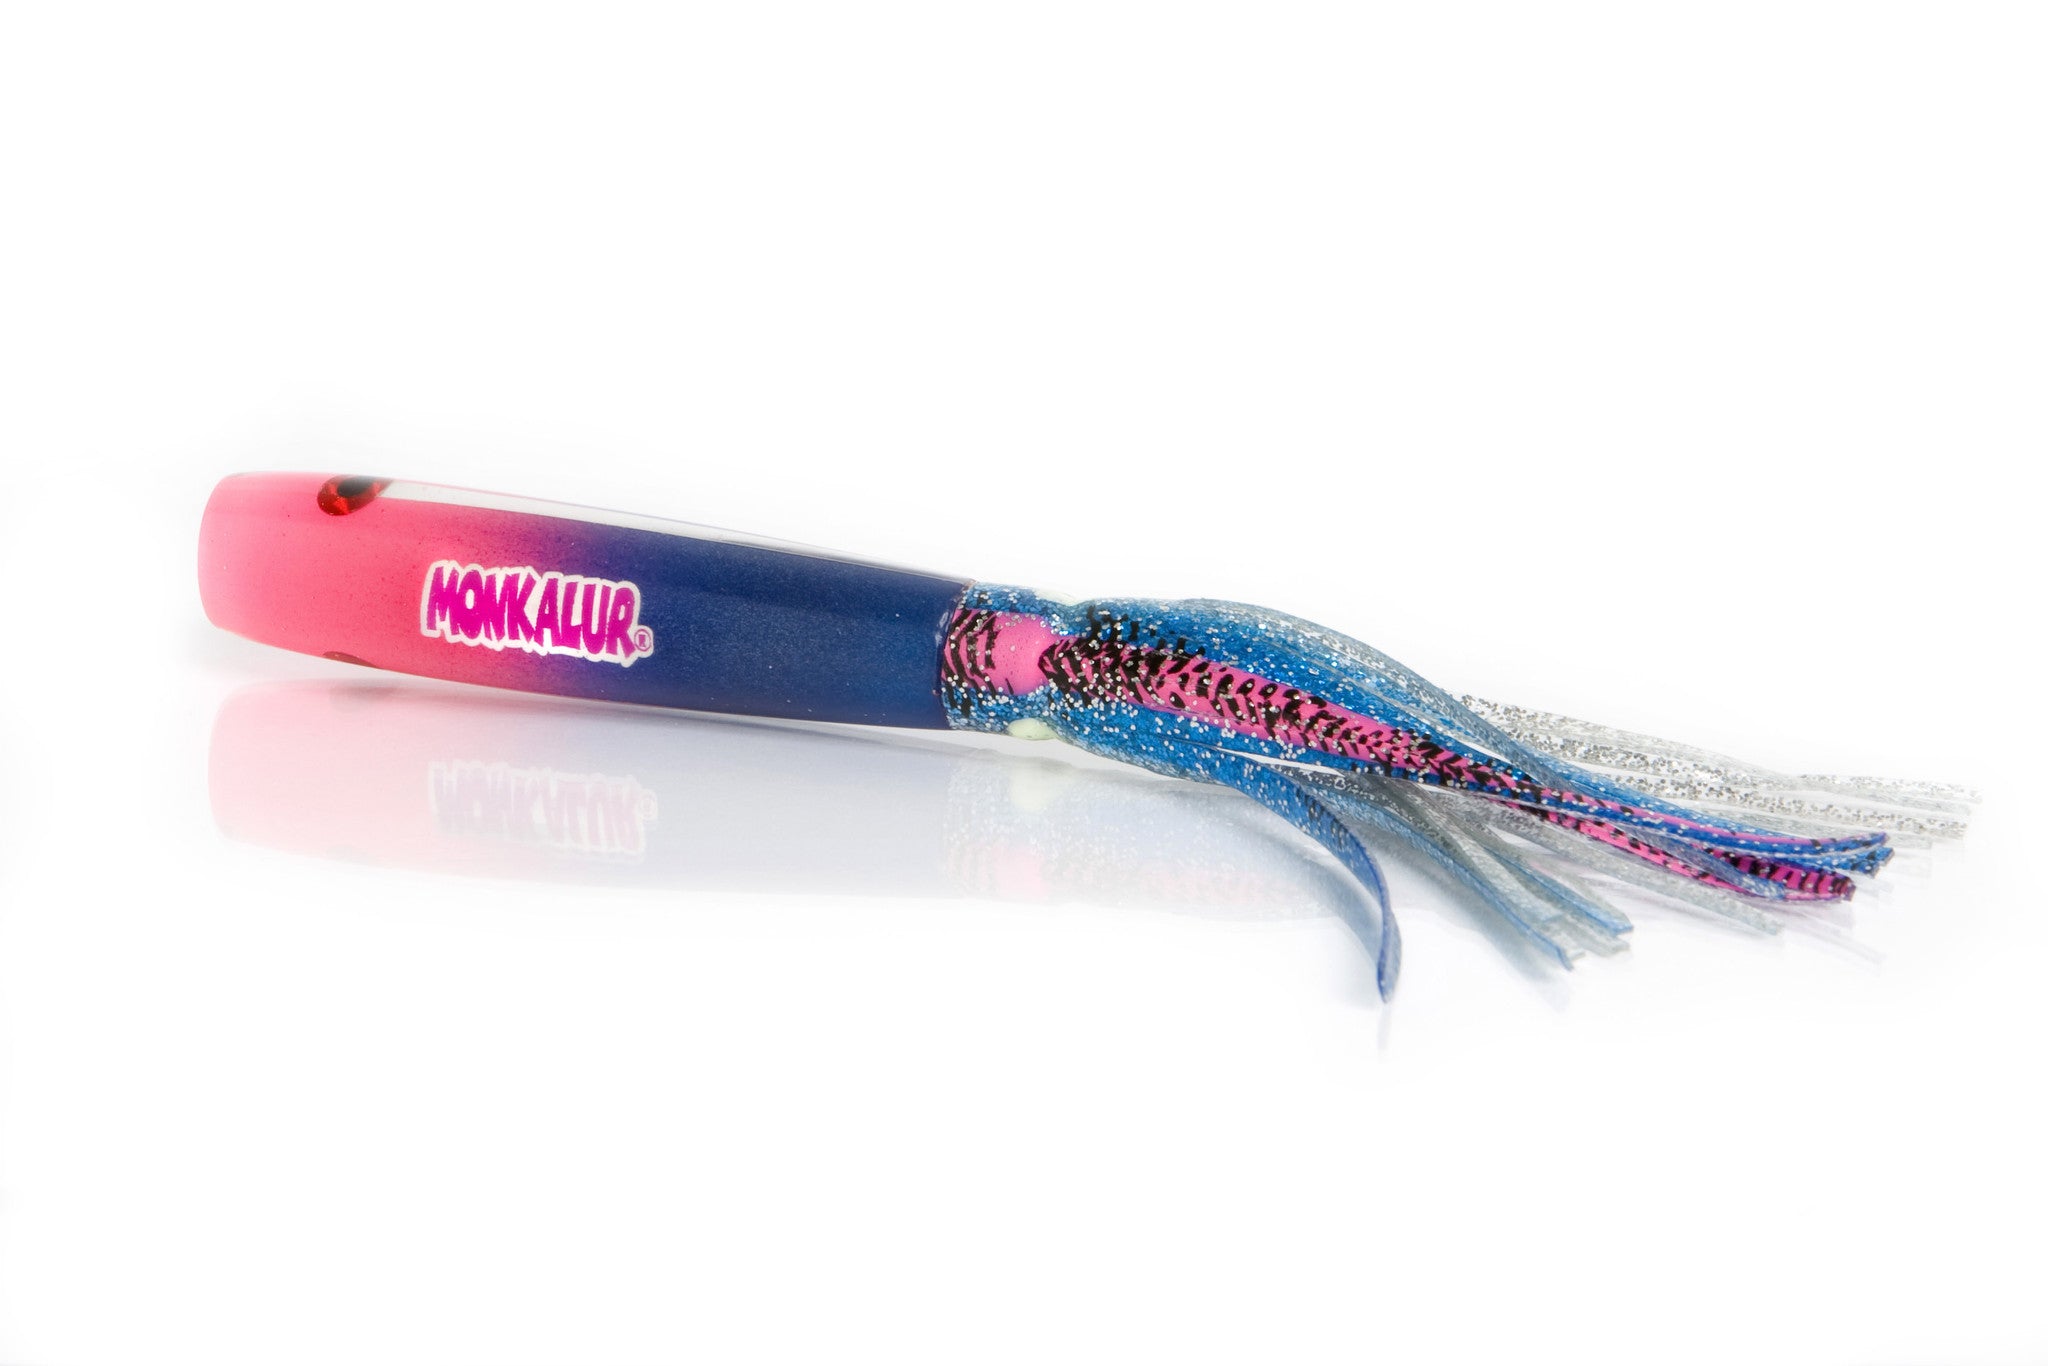 Trolling Lure - Pink & Blue Monkalur for Offshore Fishing